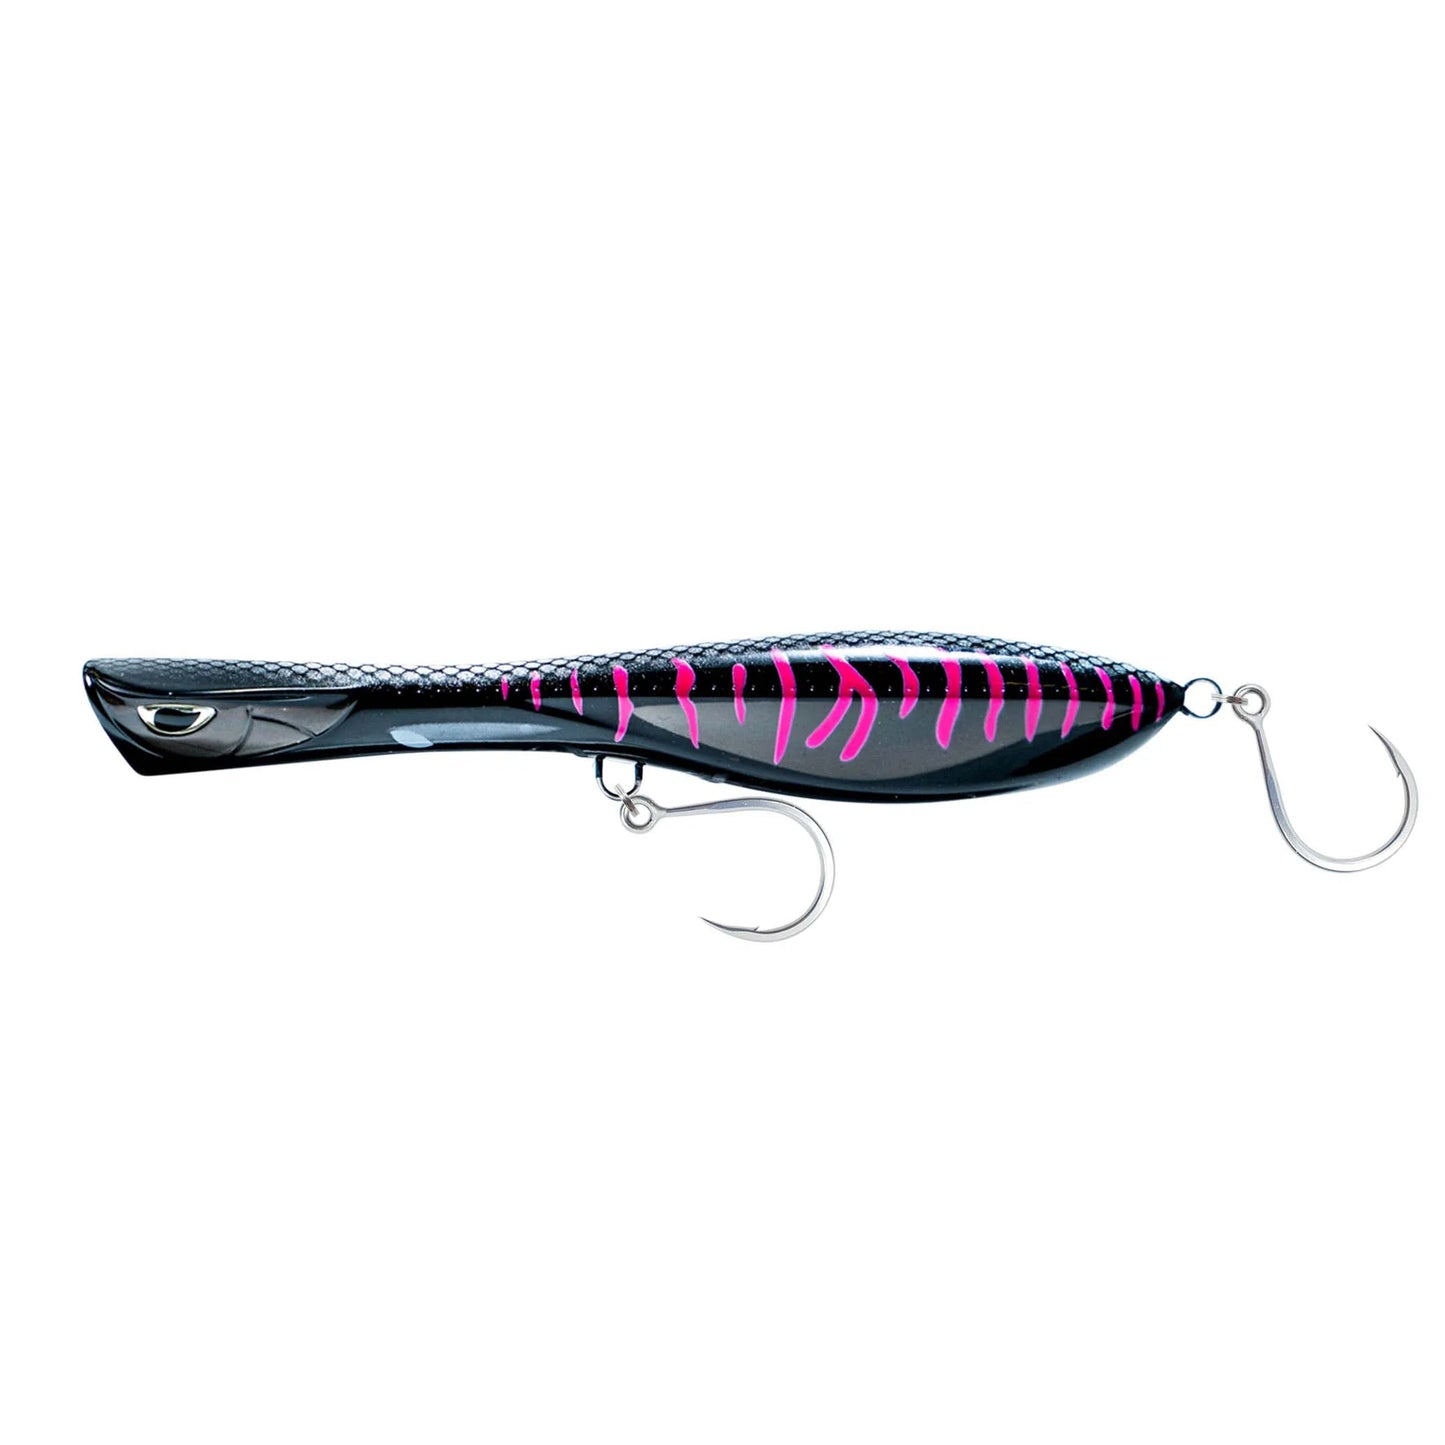 Nomad Dartwing Popper 165mm-Lure - Poppers, Stickbaits & Pencils-Nomad-Black Pink Mackerel-Fishing Station